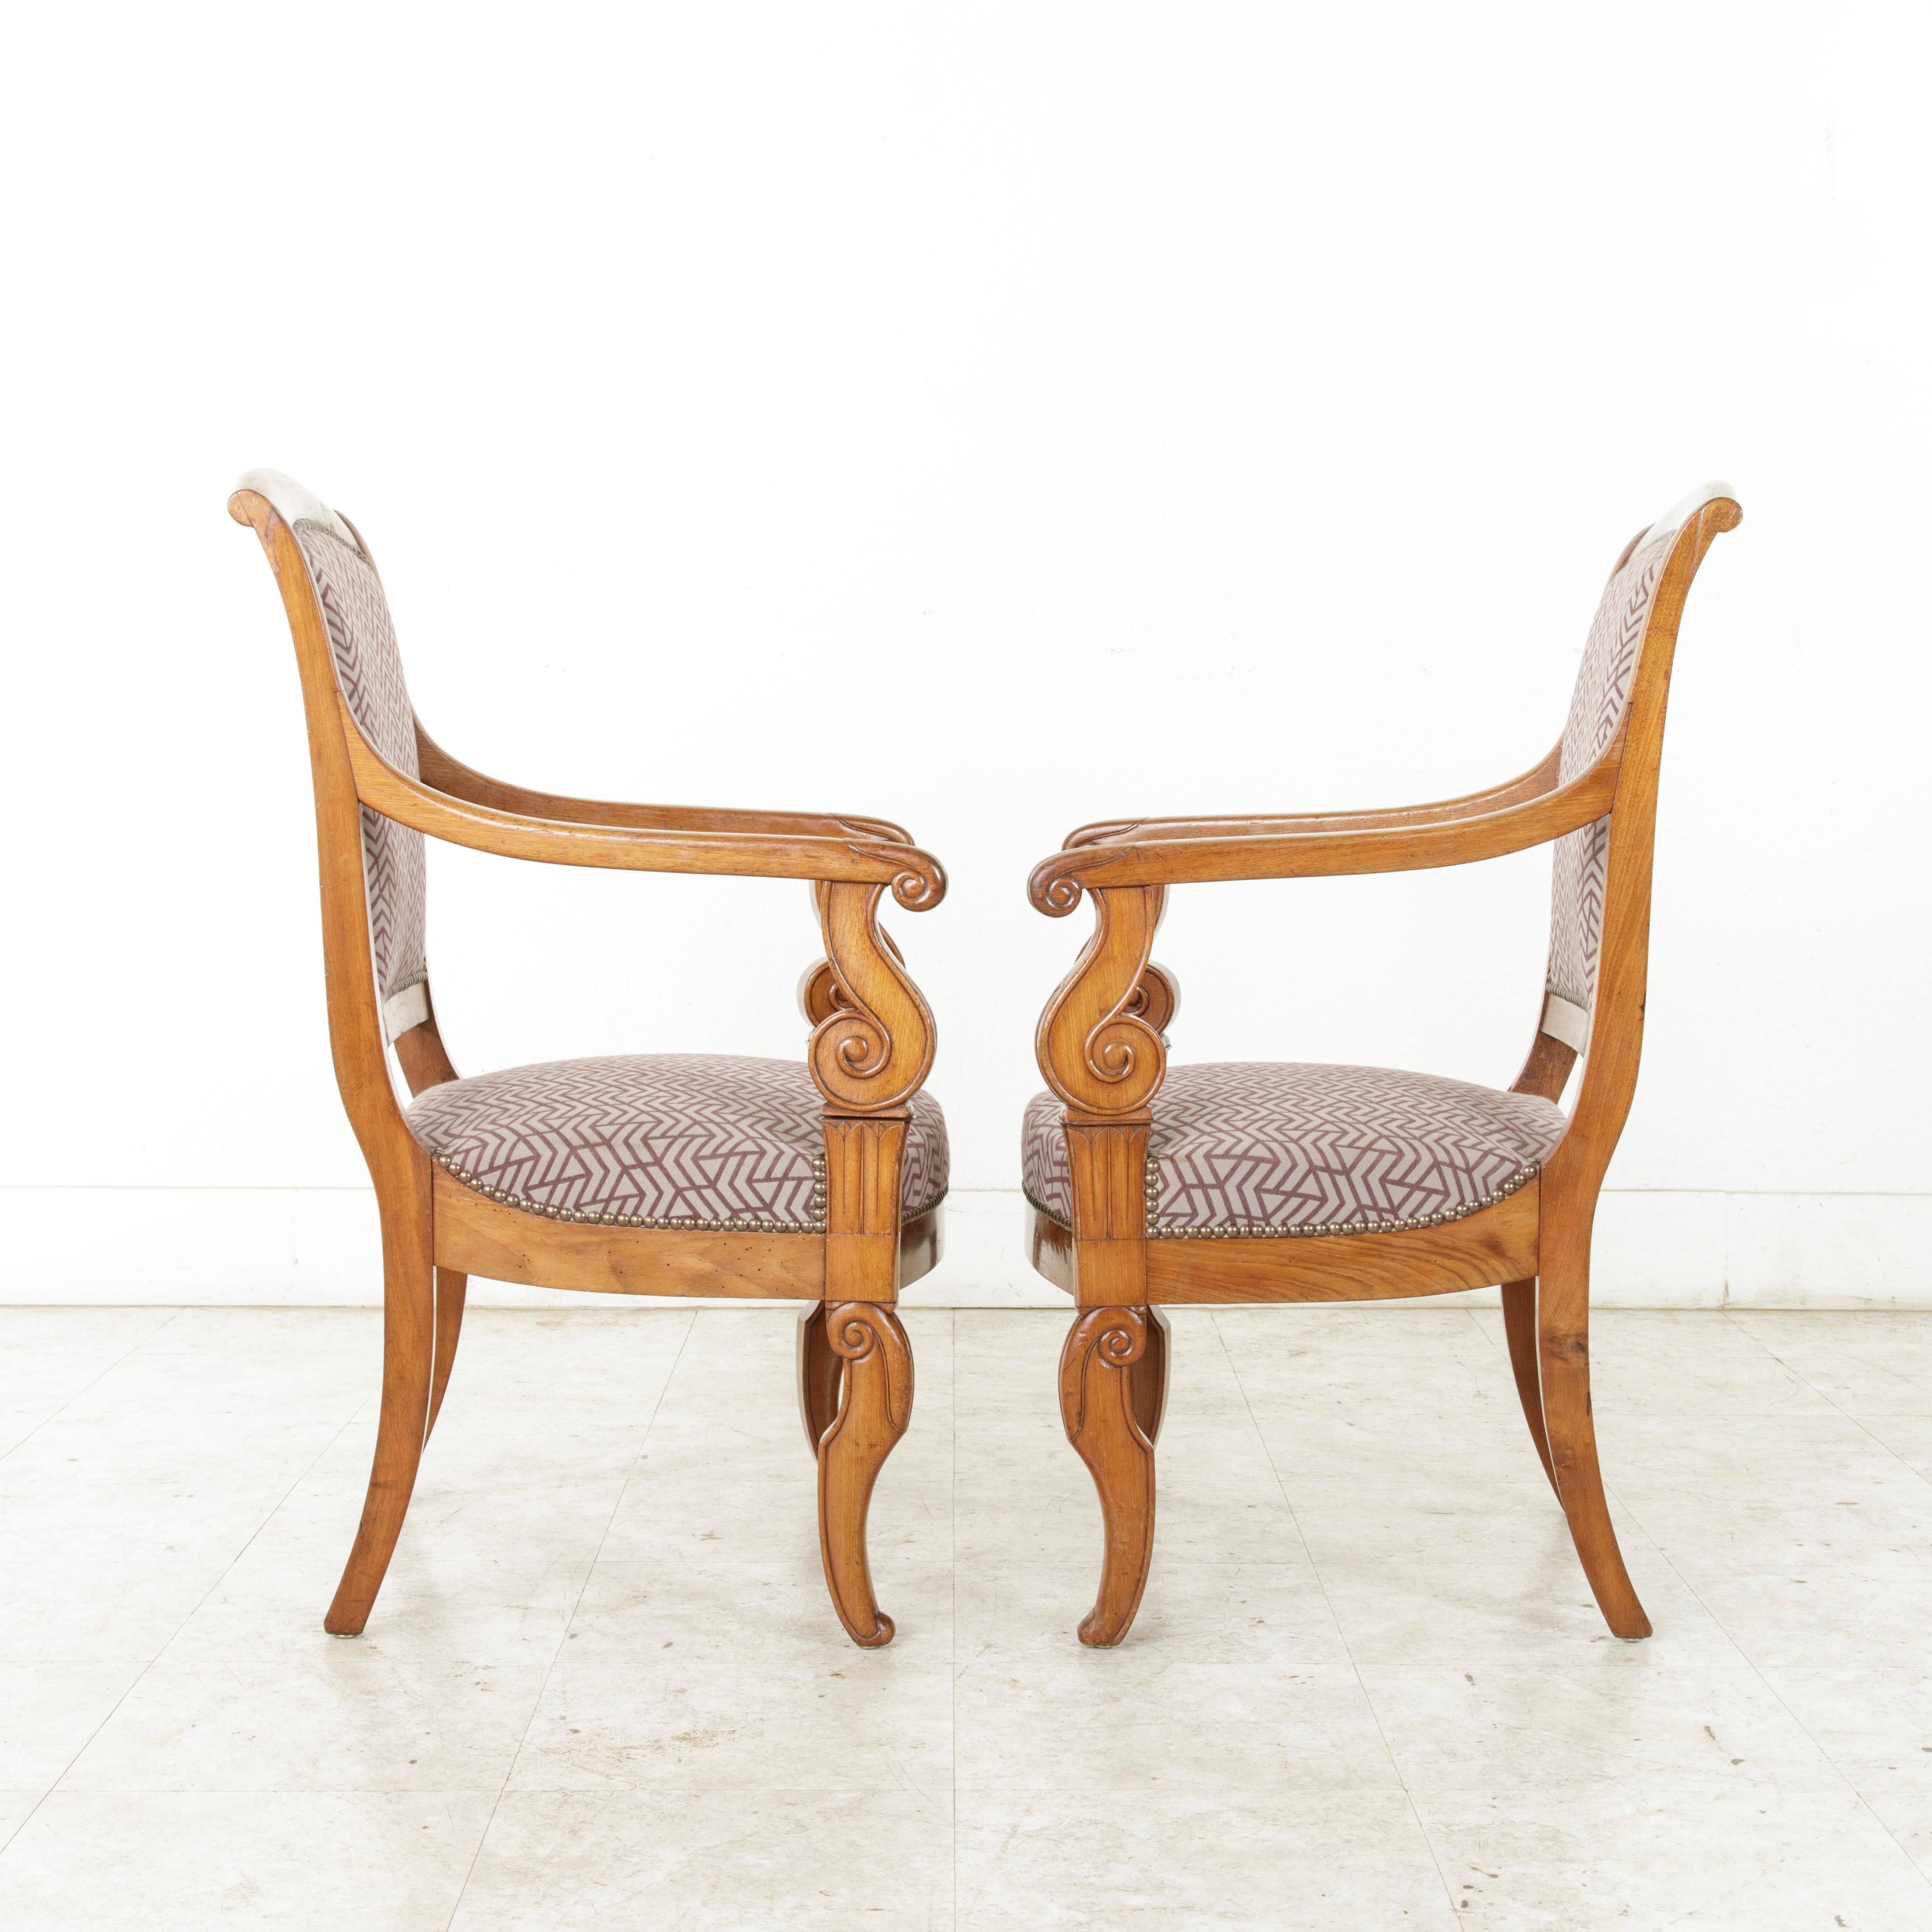 Pair of Mid-19th Century French Restauration Period Walnut Armchairs or Bergeres 2